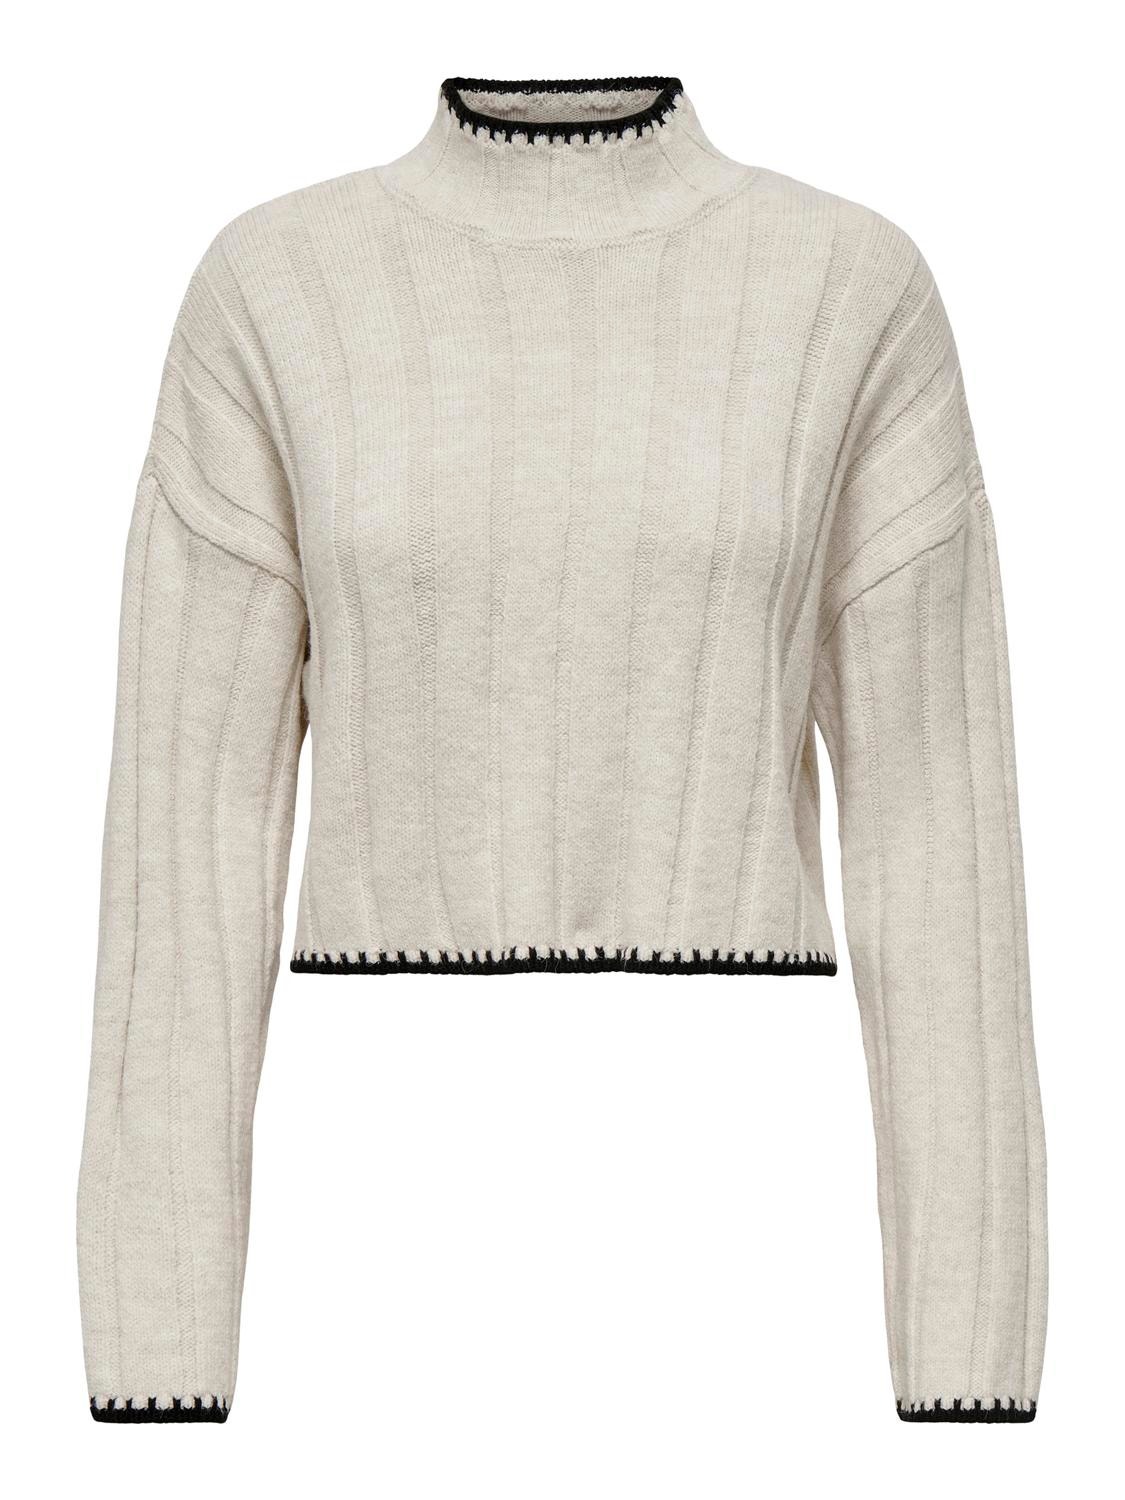 ONLY High neck knitted pullover -Pumice Stone - 15329963